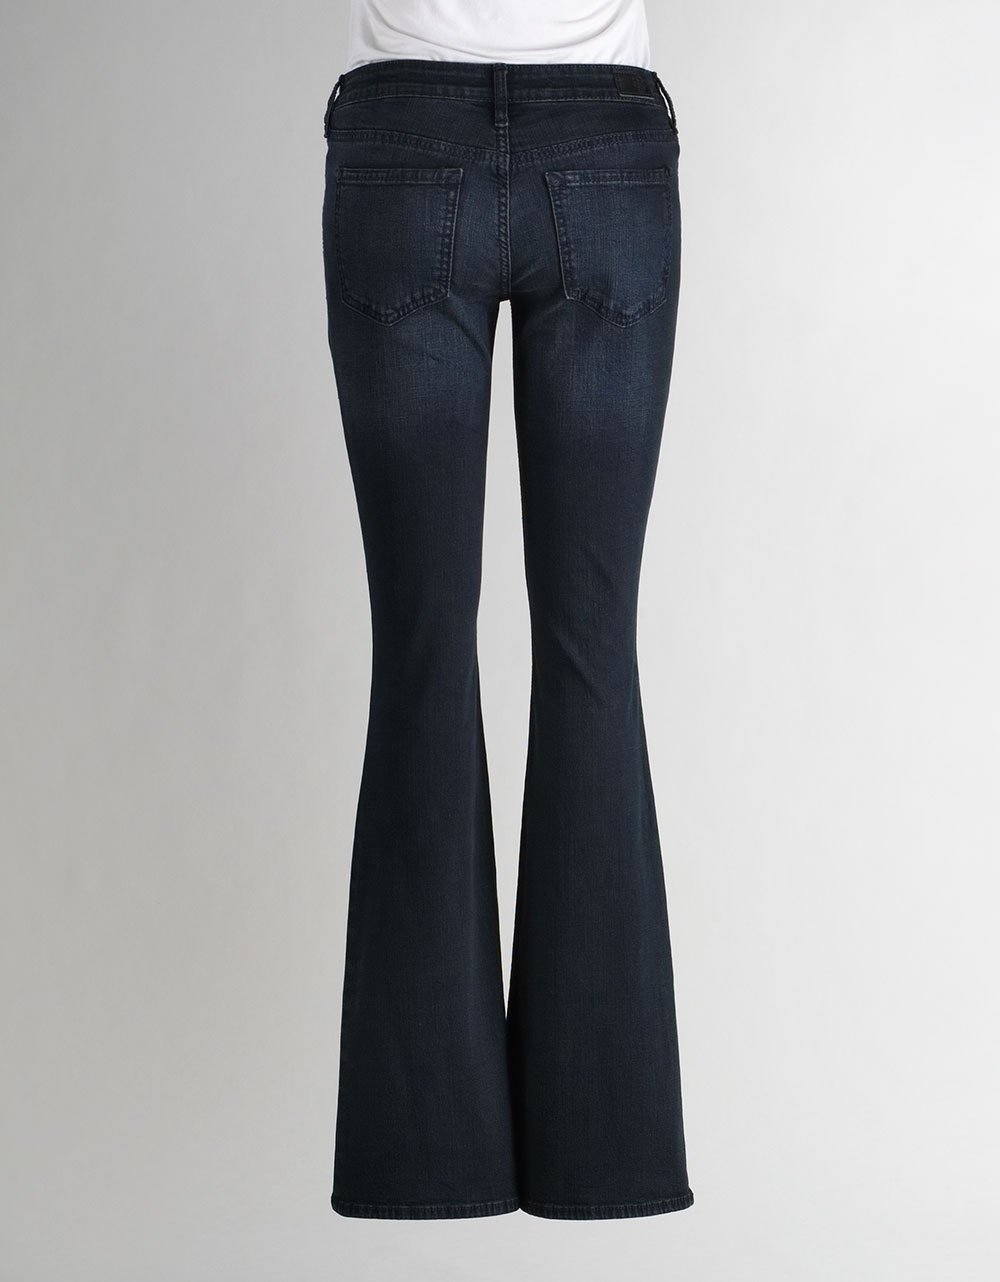 Jessica Simpson Sassy Low Rise Skinny Flare Jeans in Black - Lyst